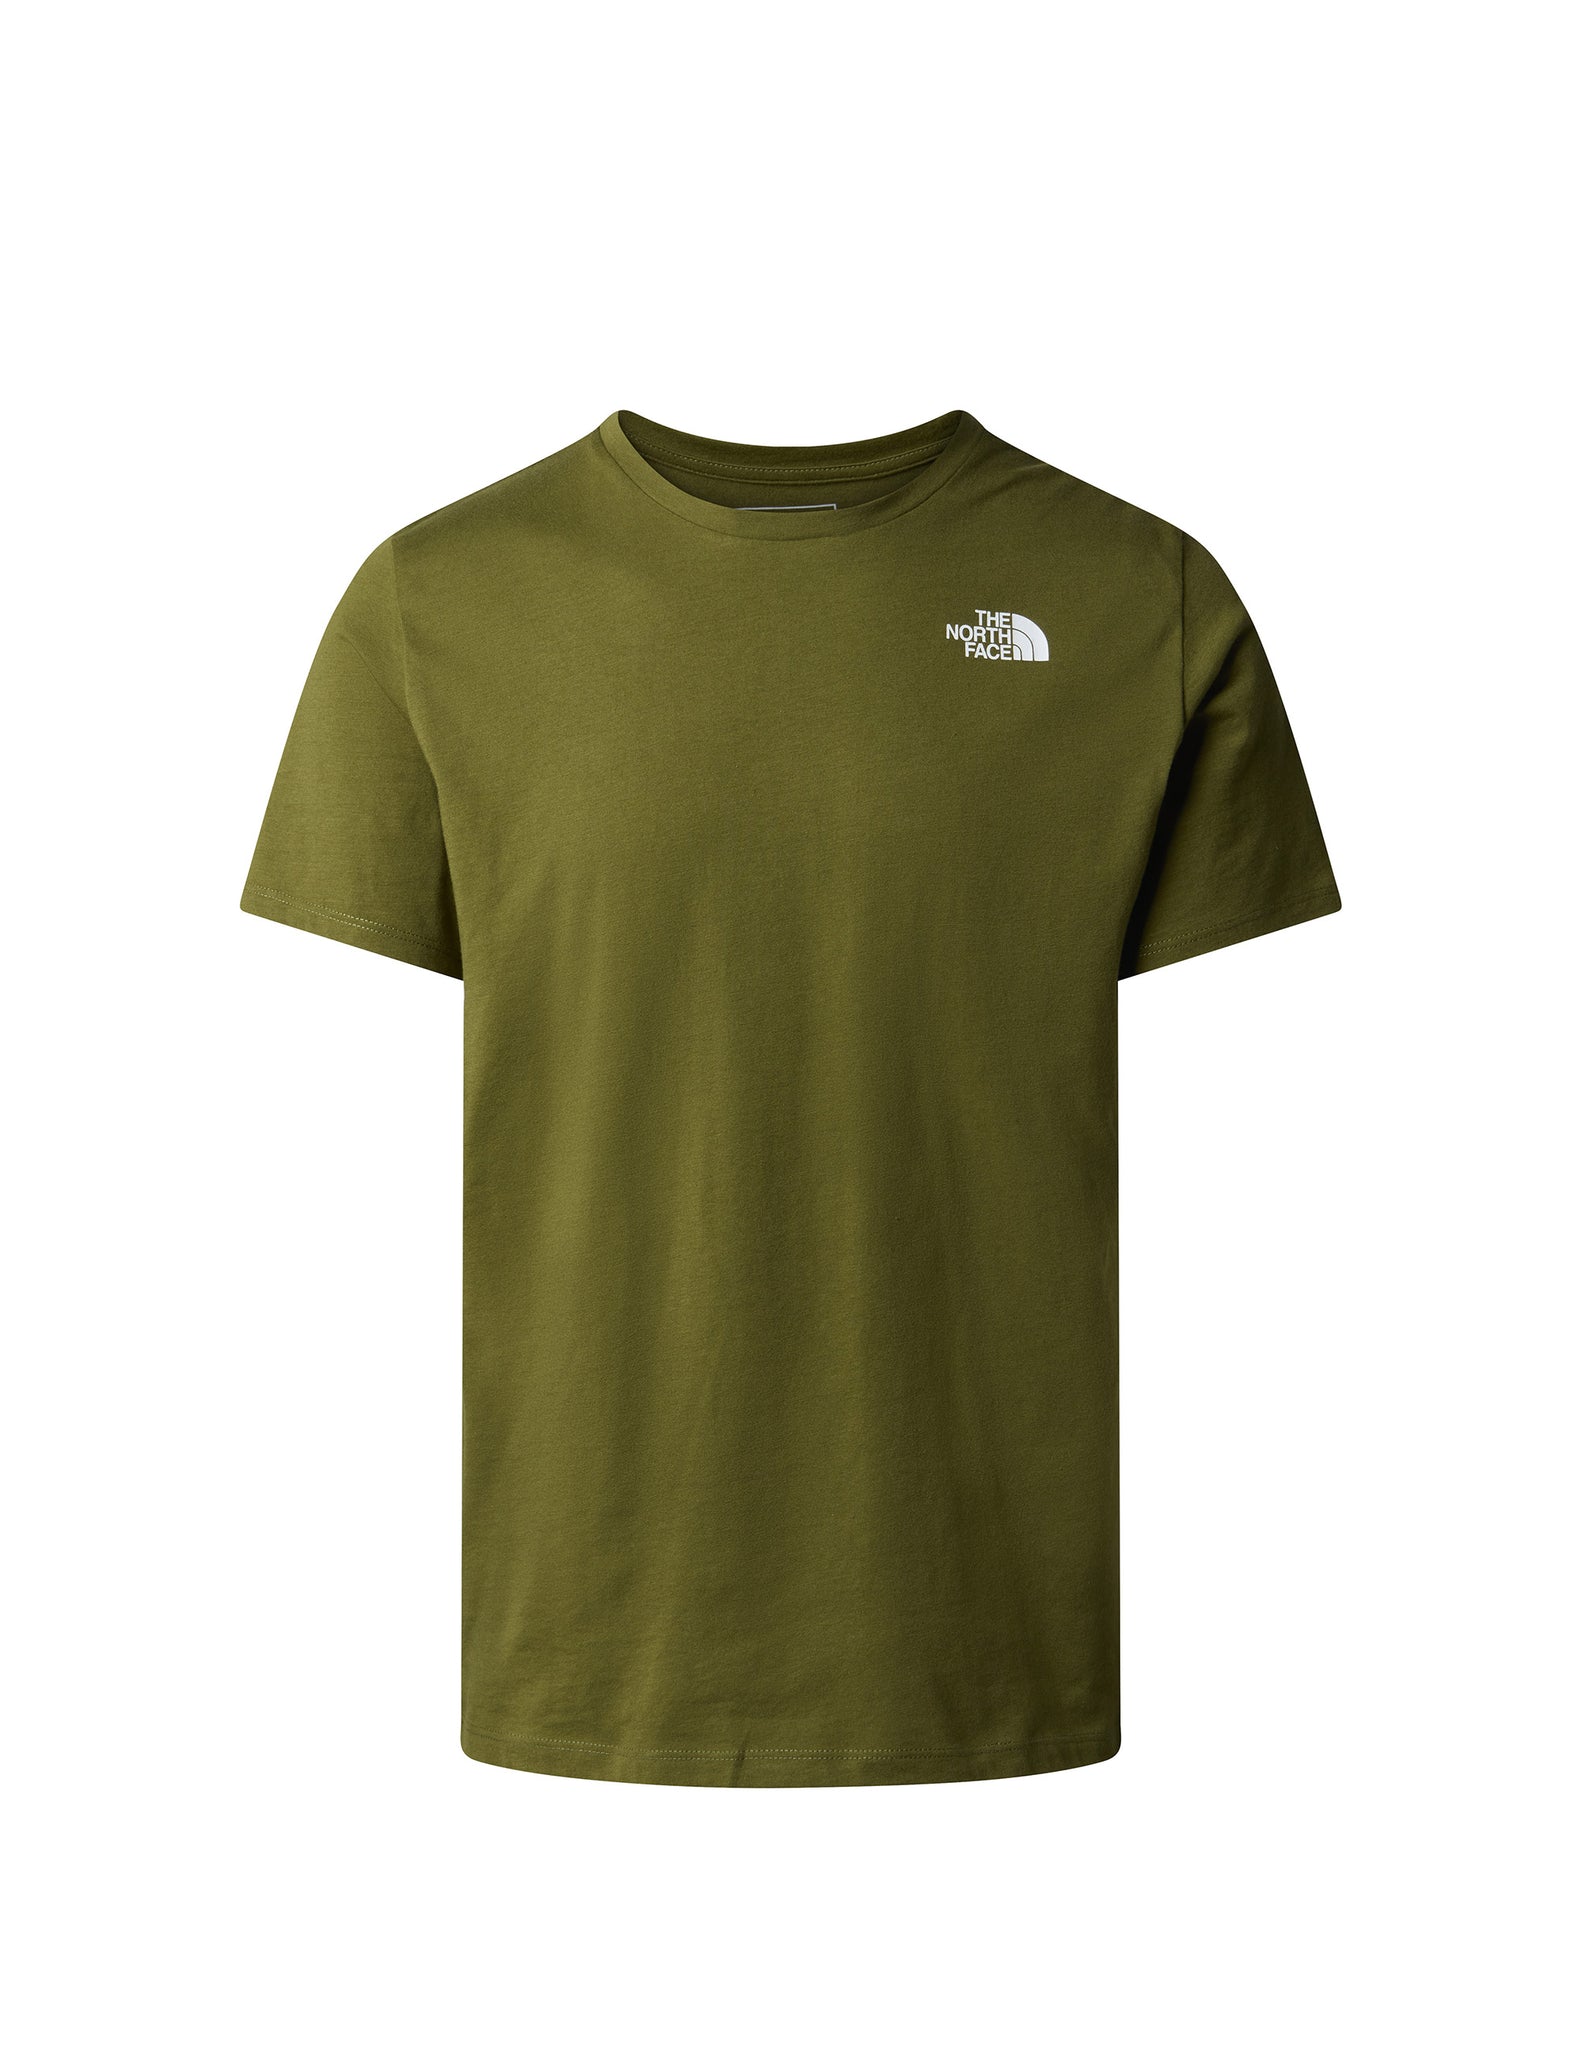 The North Face Men'S Foundation Graphics Tee Verde Militare